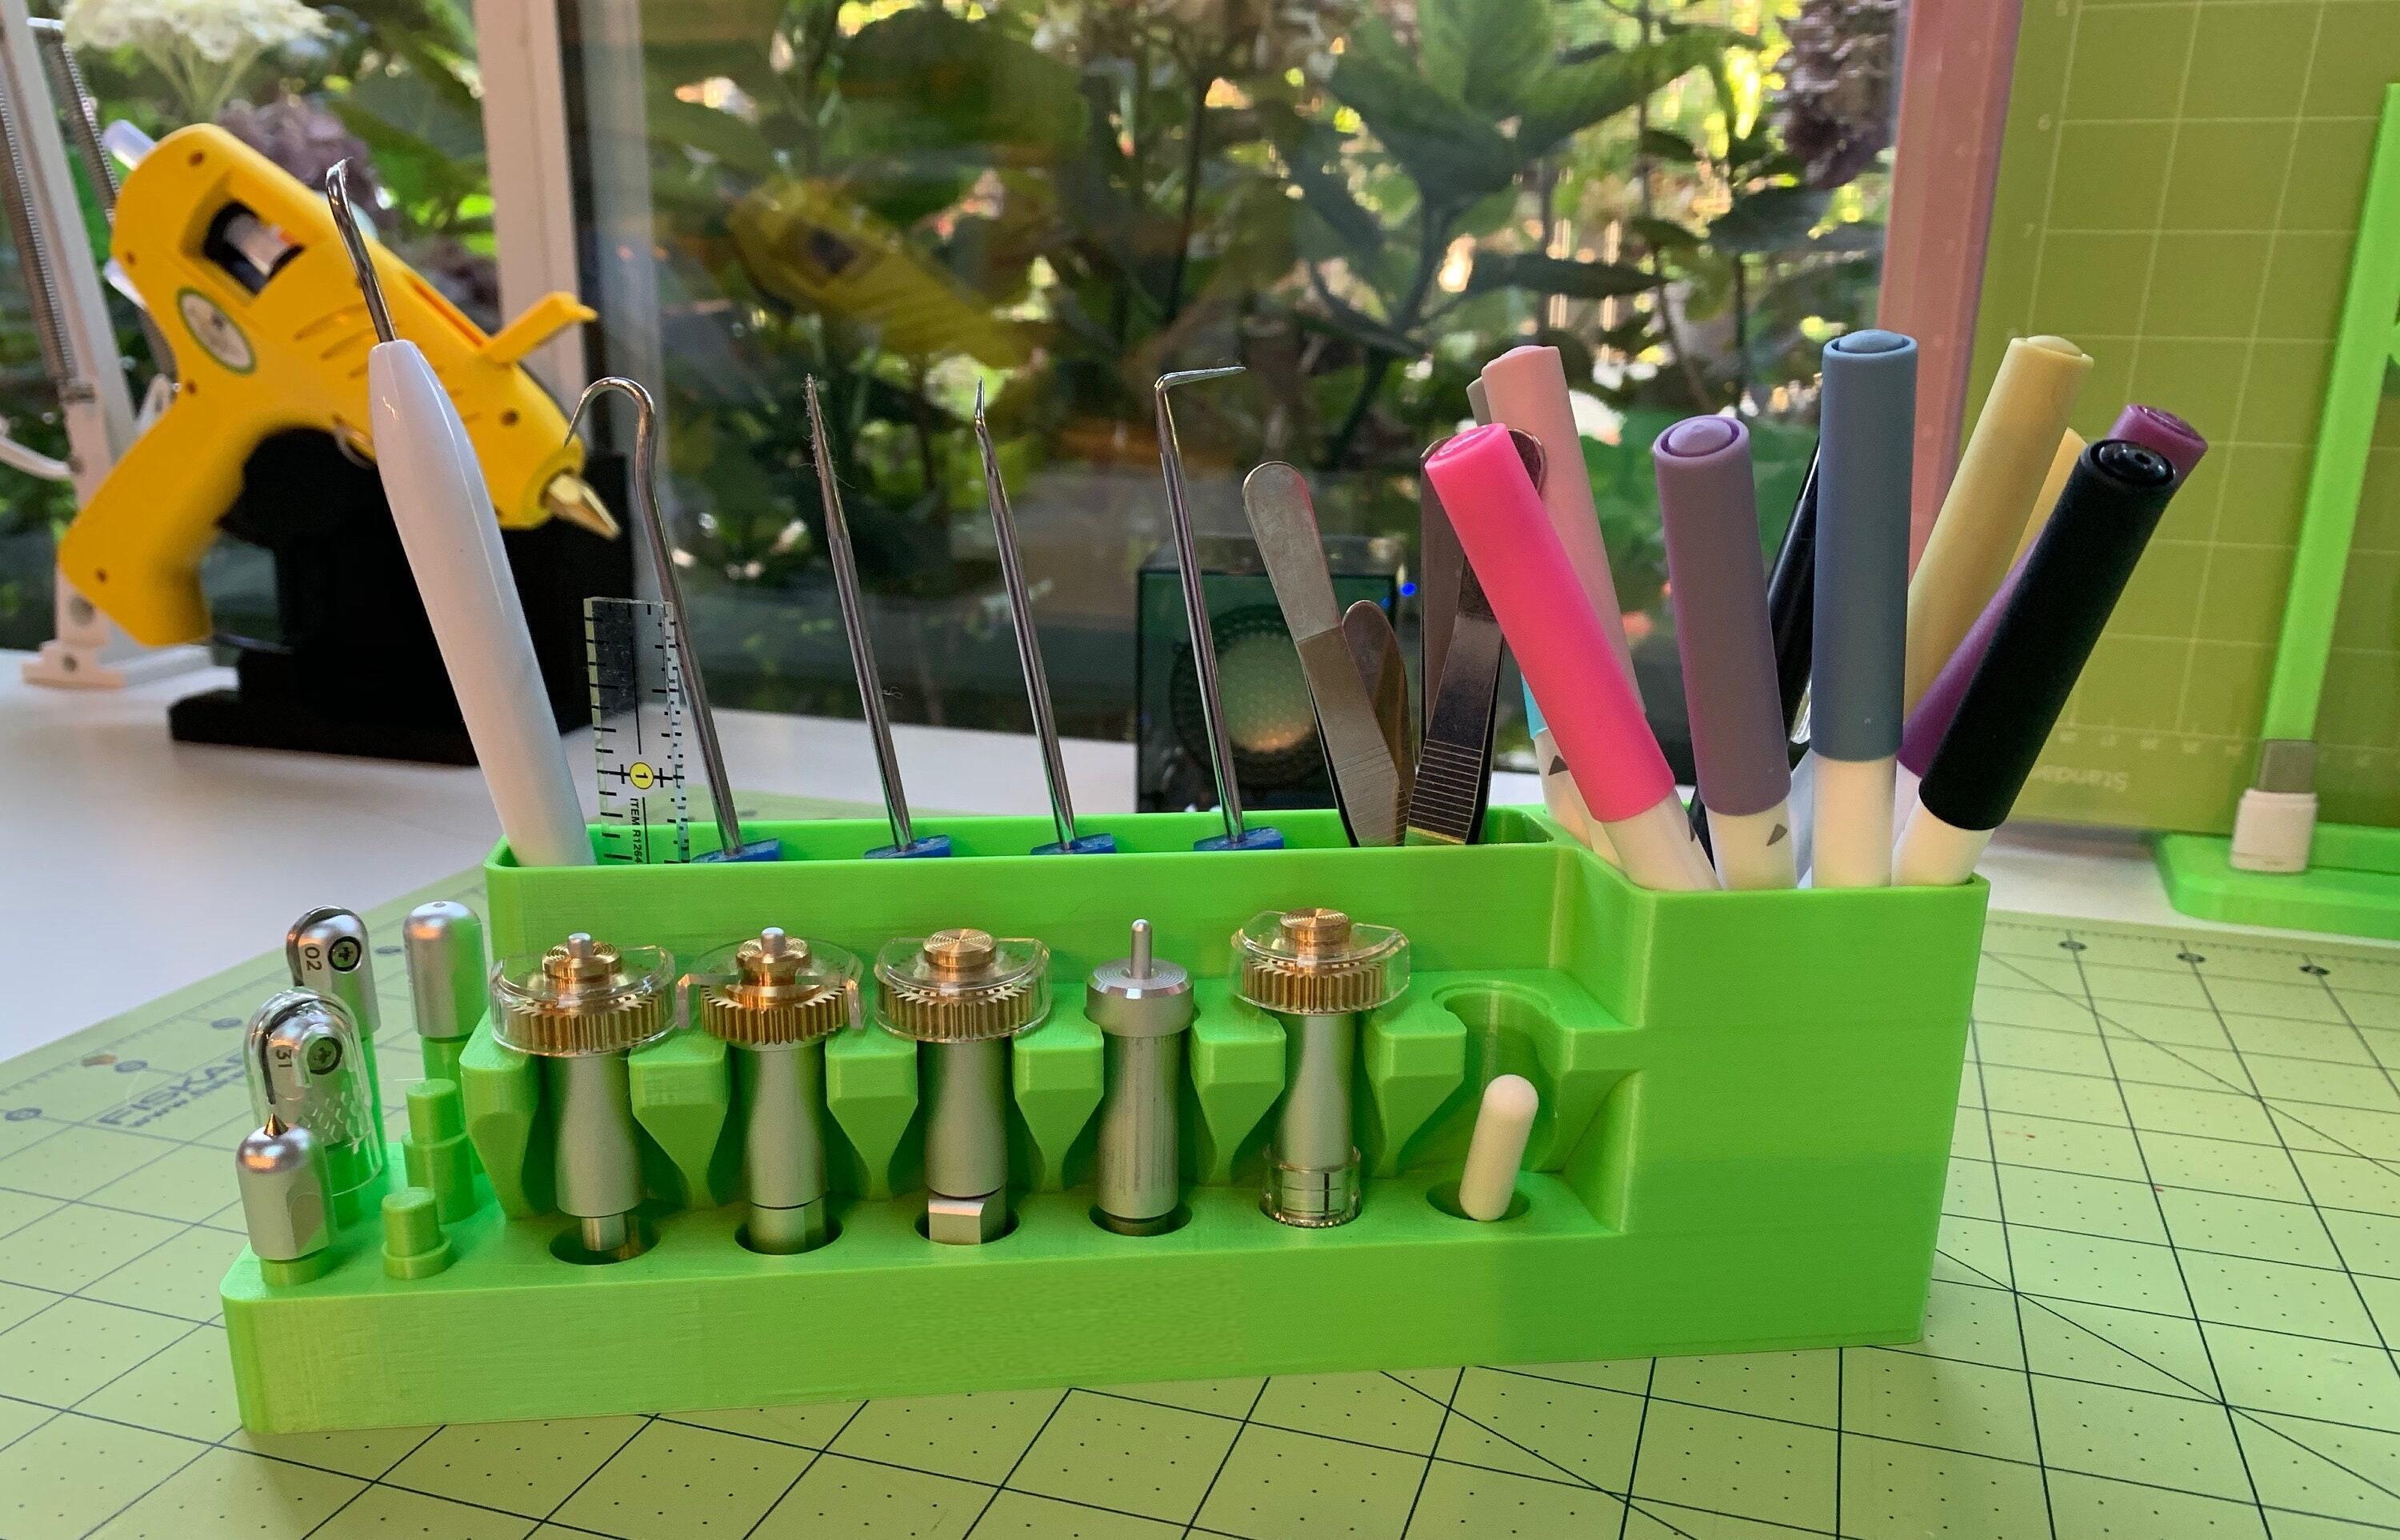 STL file Cricut tool holder 🔧・Template to download and 3D print